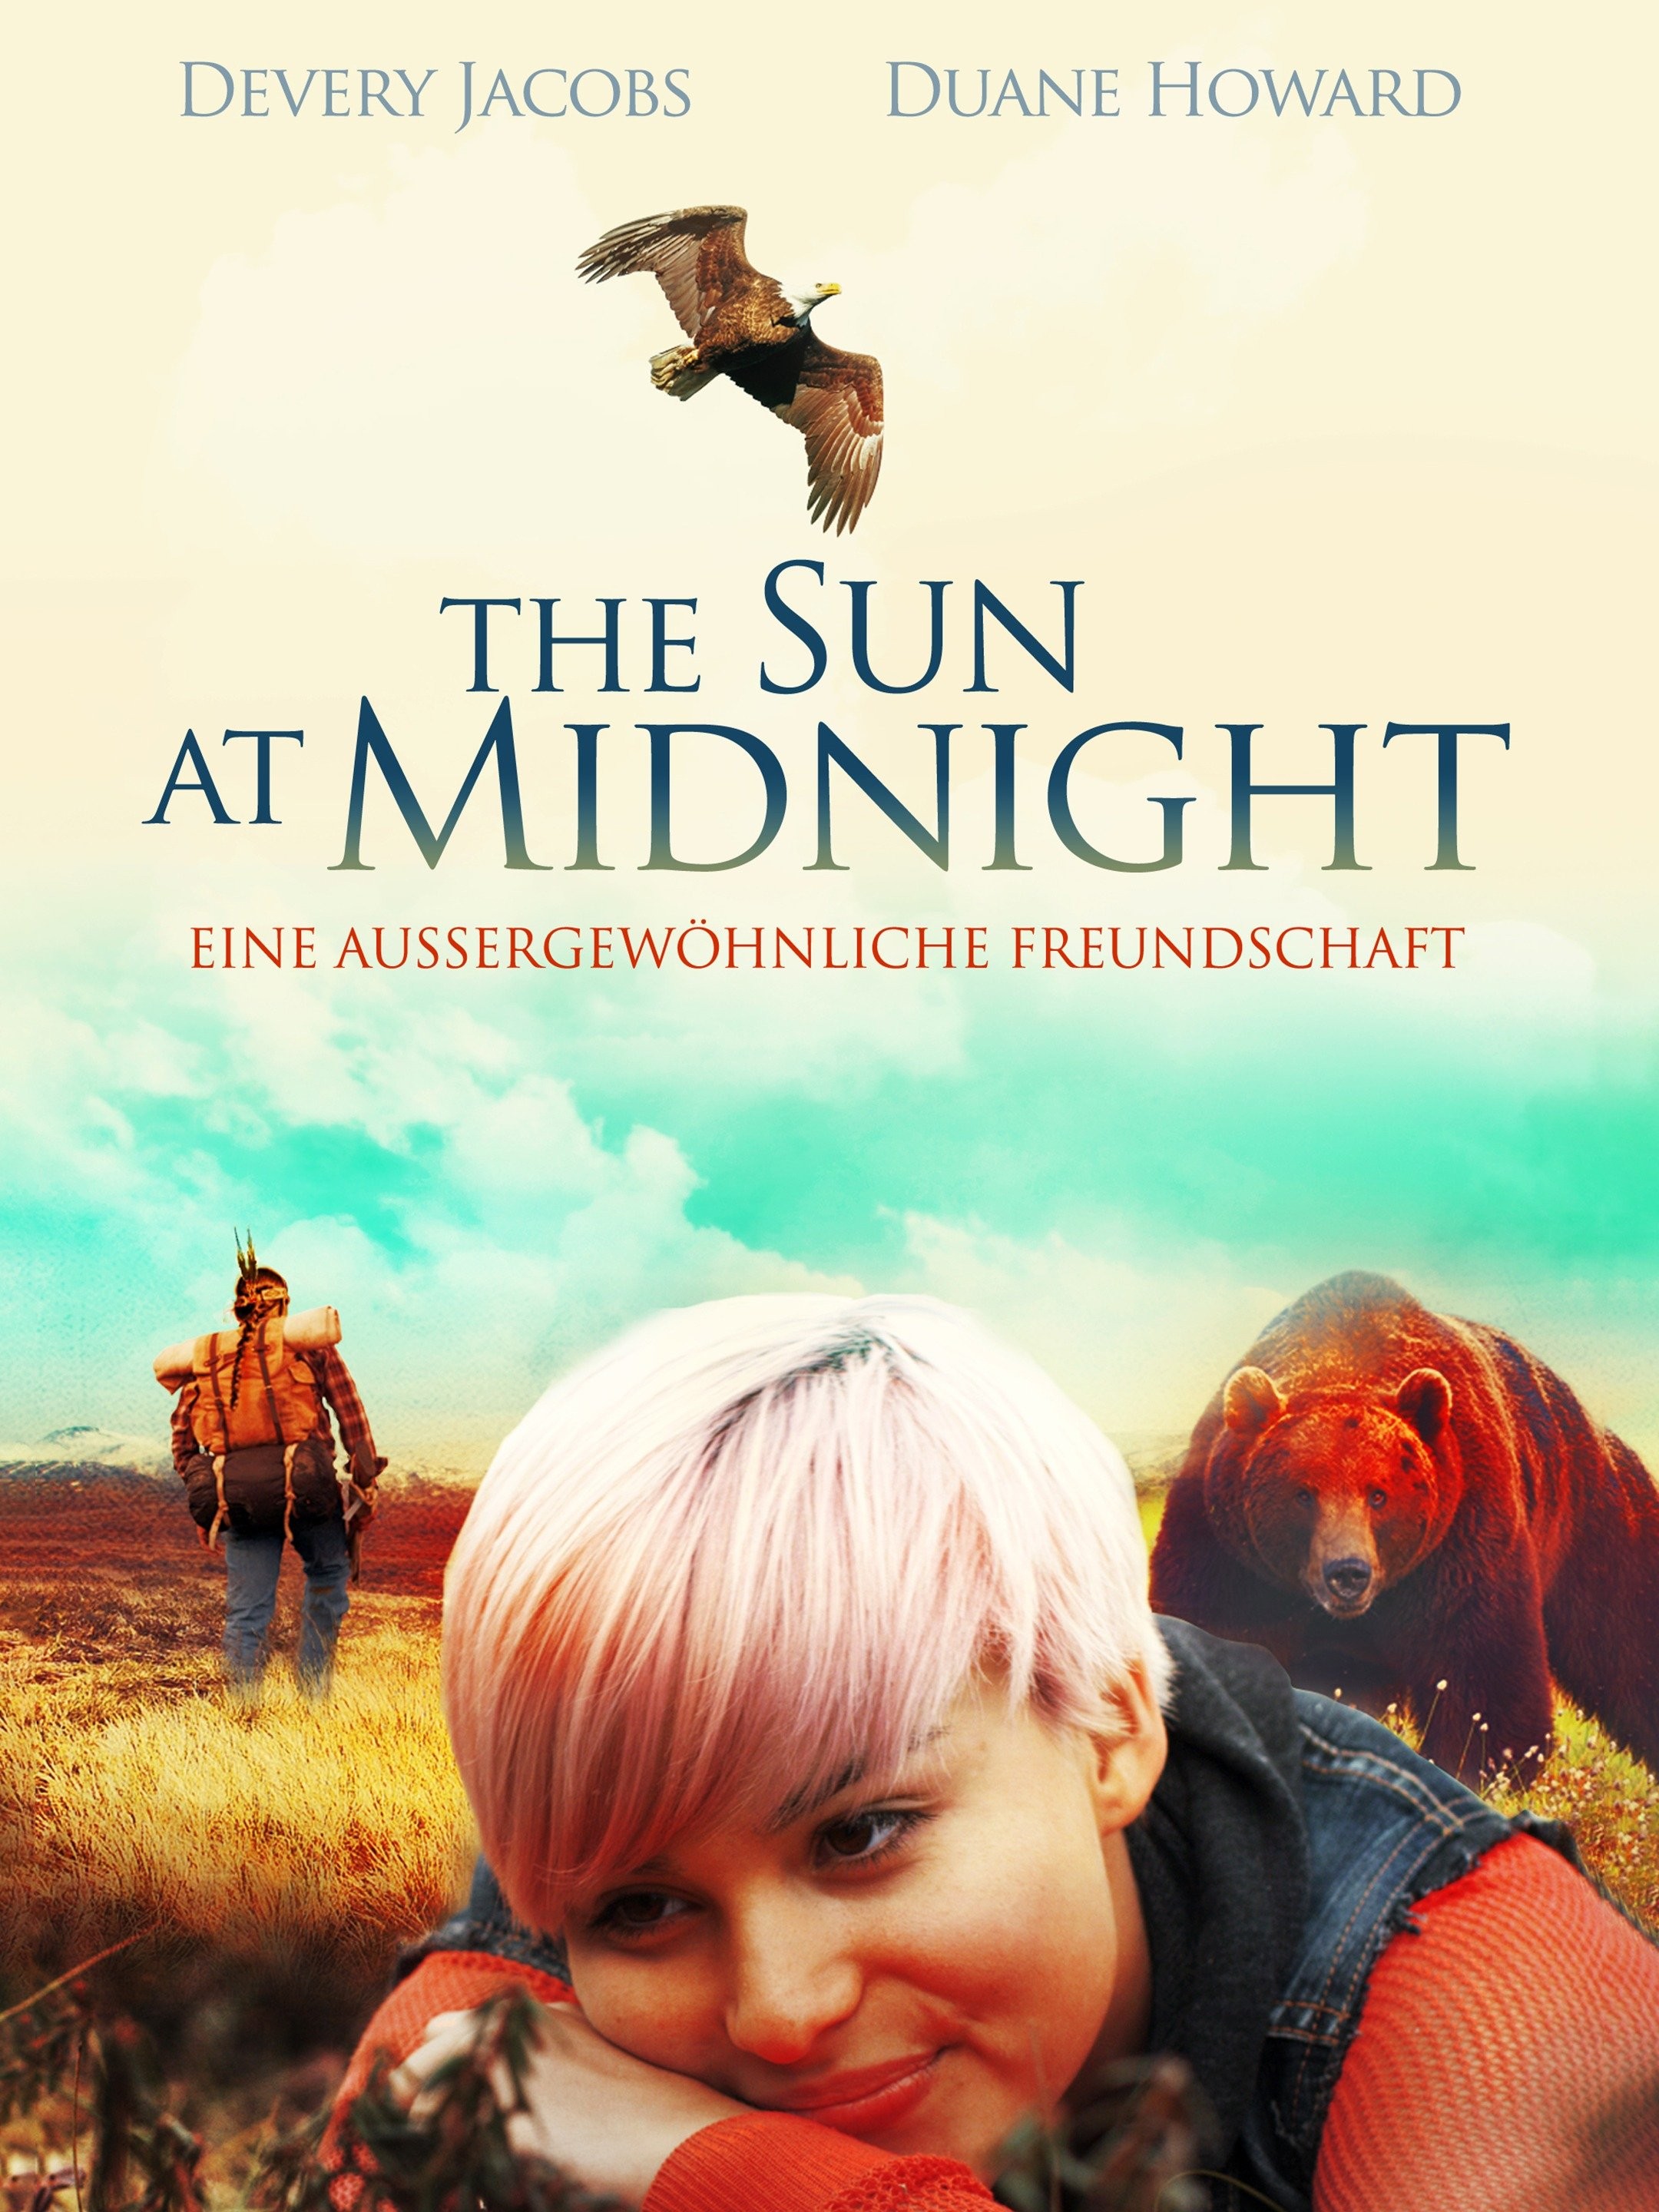 Midnight Sun: Where to Watch and Stream Online